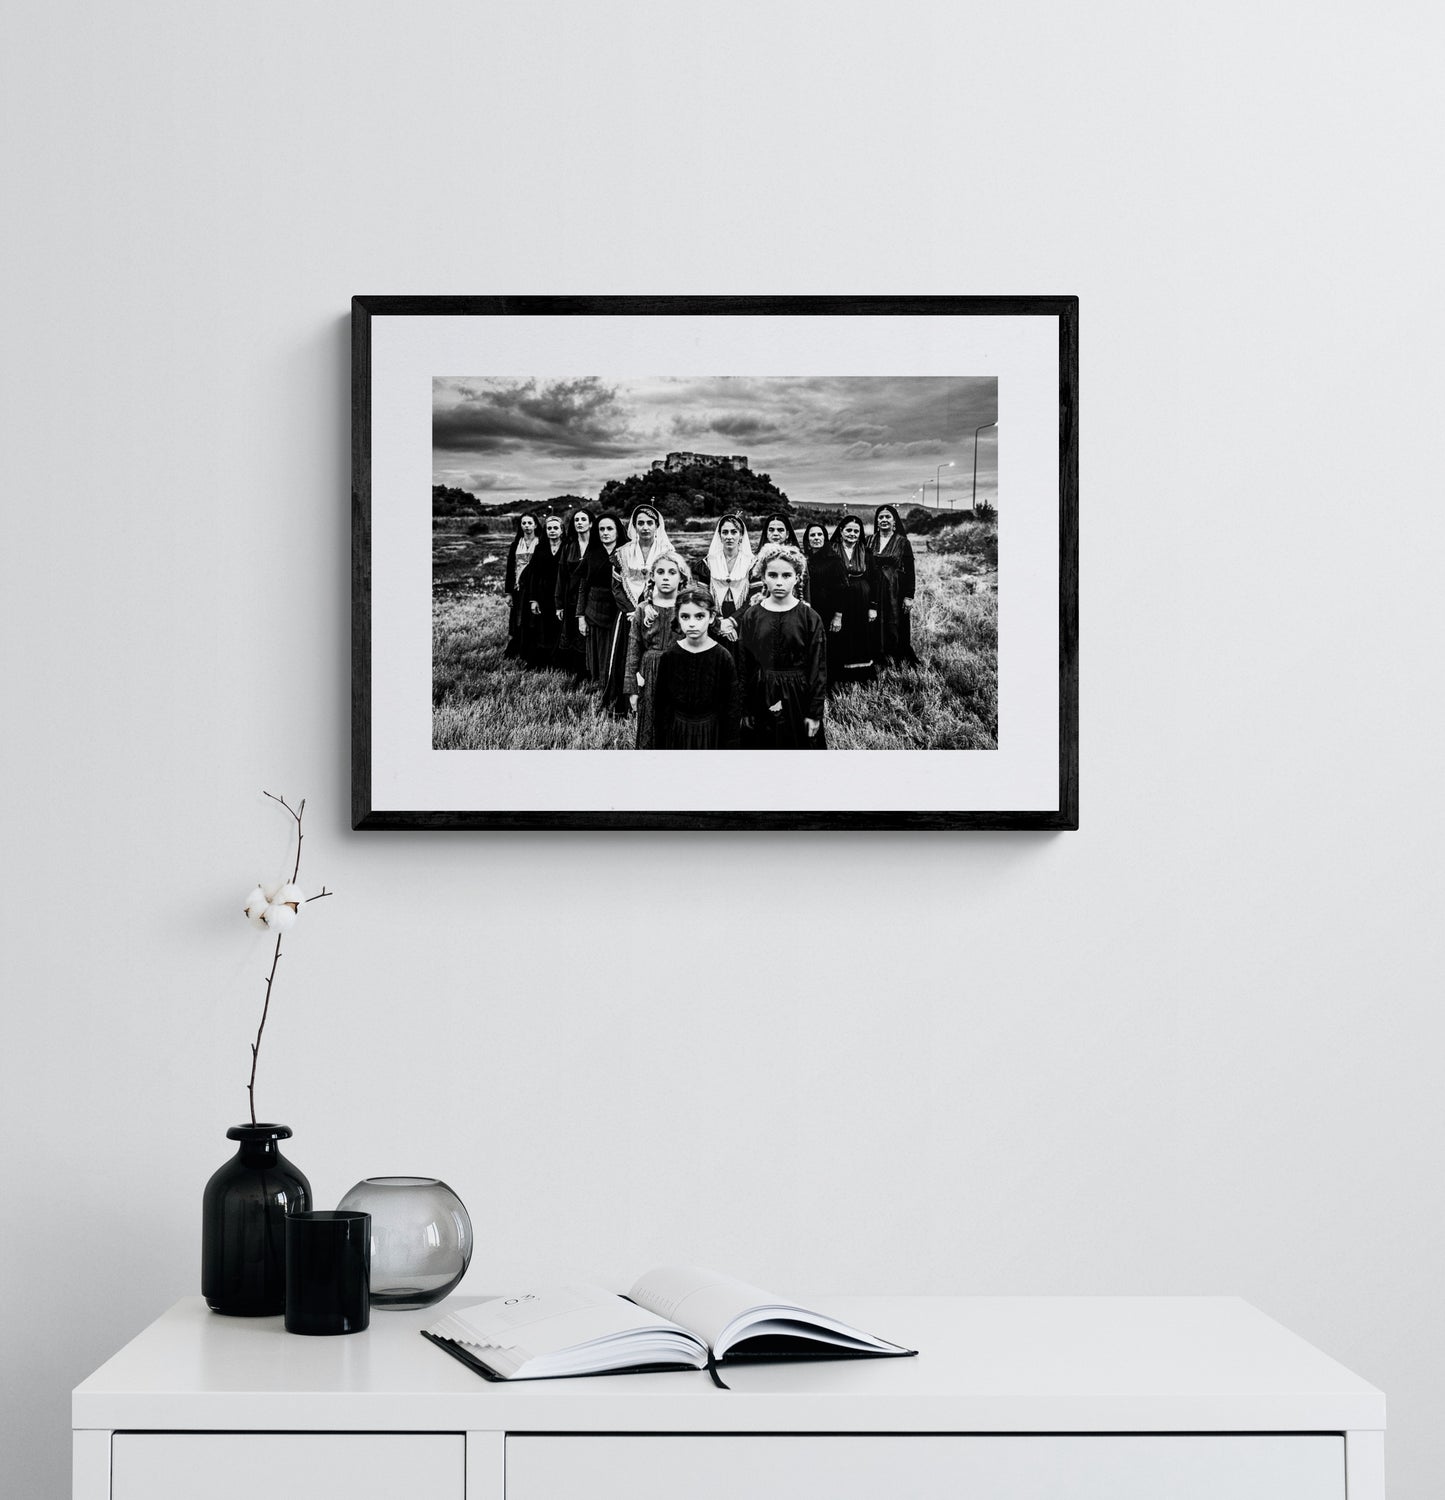 Black and White Photography Wall Art Greece | Costumes of Lefkada island at a castle multiple generations Ionian Sea by George Tatakis - single framed photo